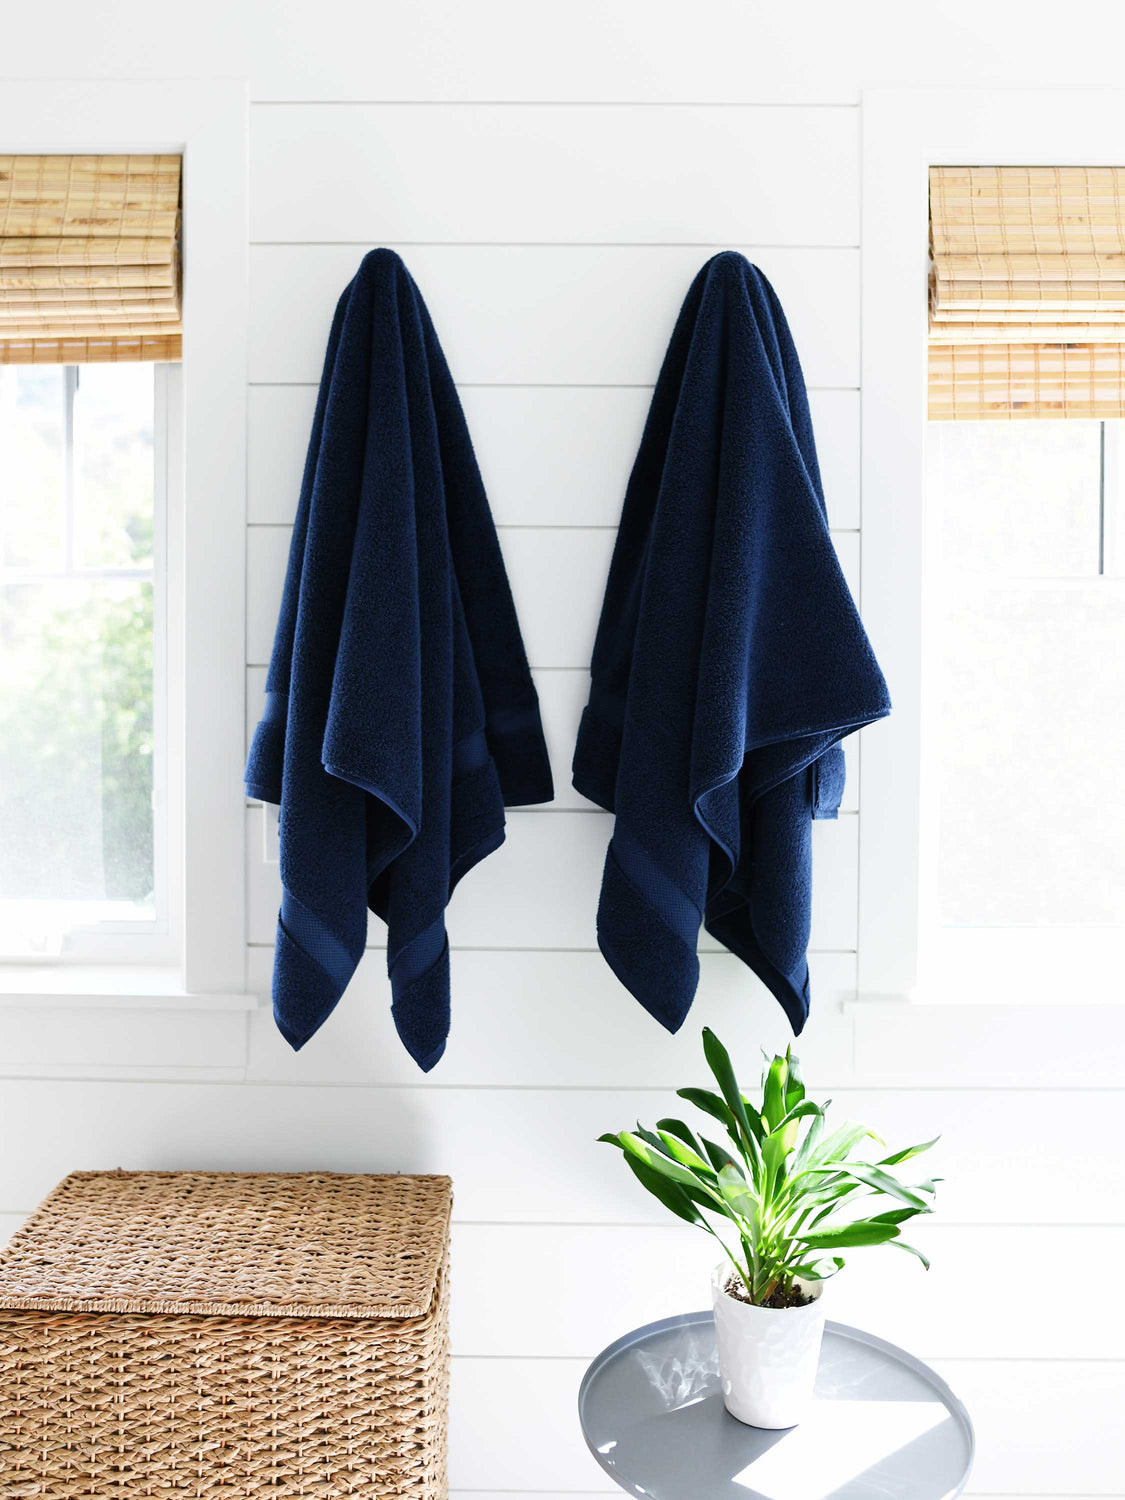 A pair of navy blue cotton bath towels hanging on a wall side by side.